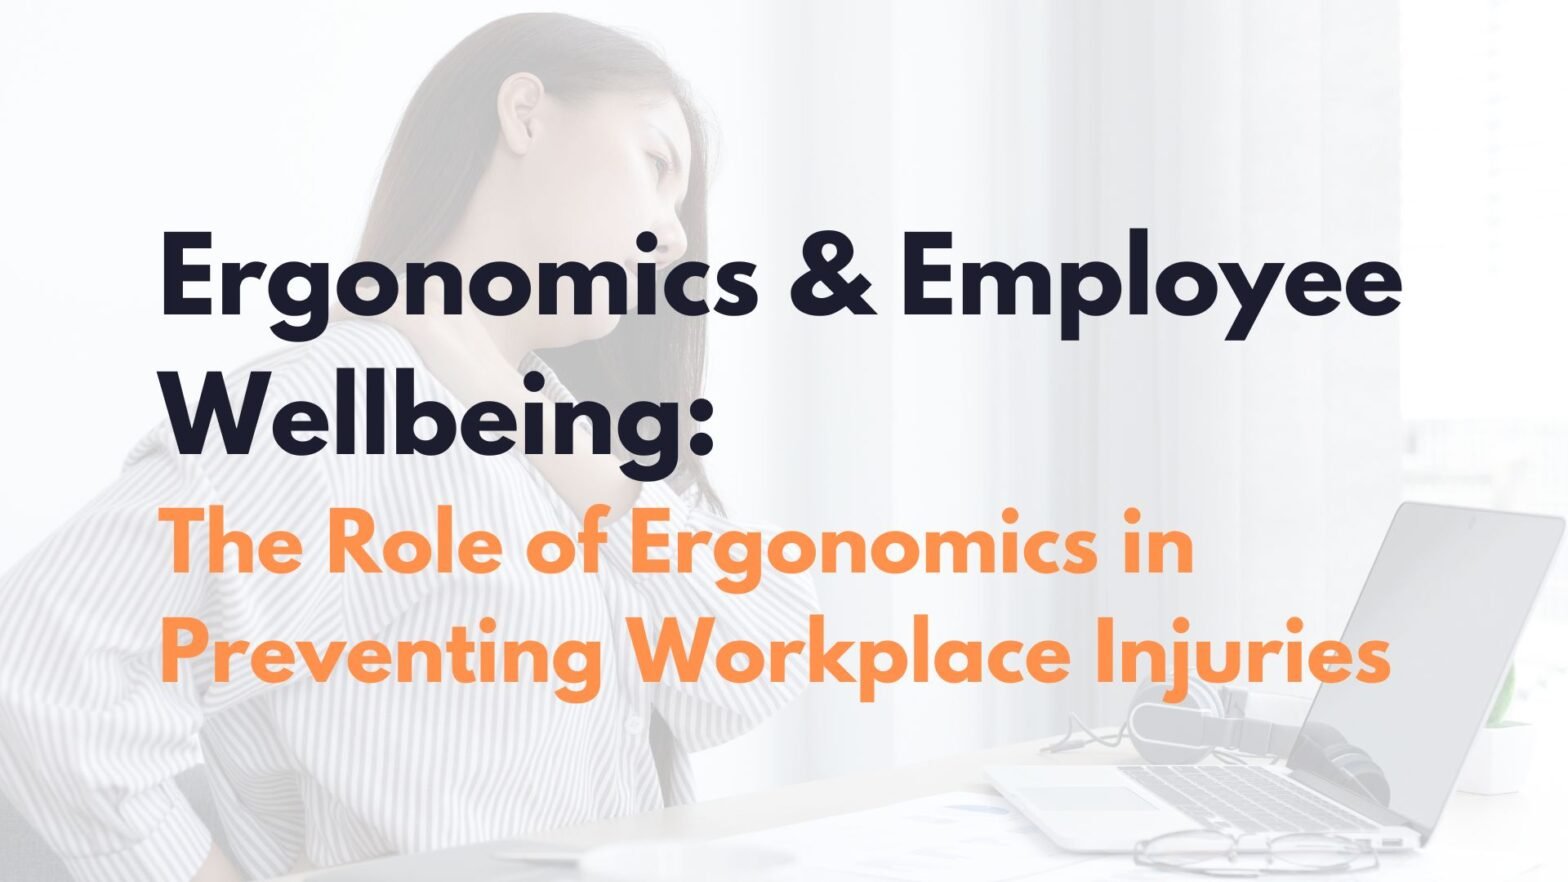 Ergonomics & Employee Well-being: The Role of Ergonomics in Preventing Workplace Injuries